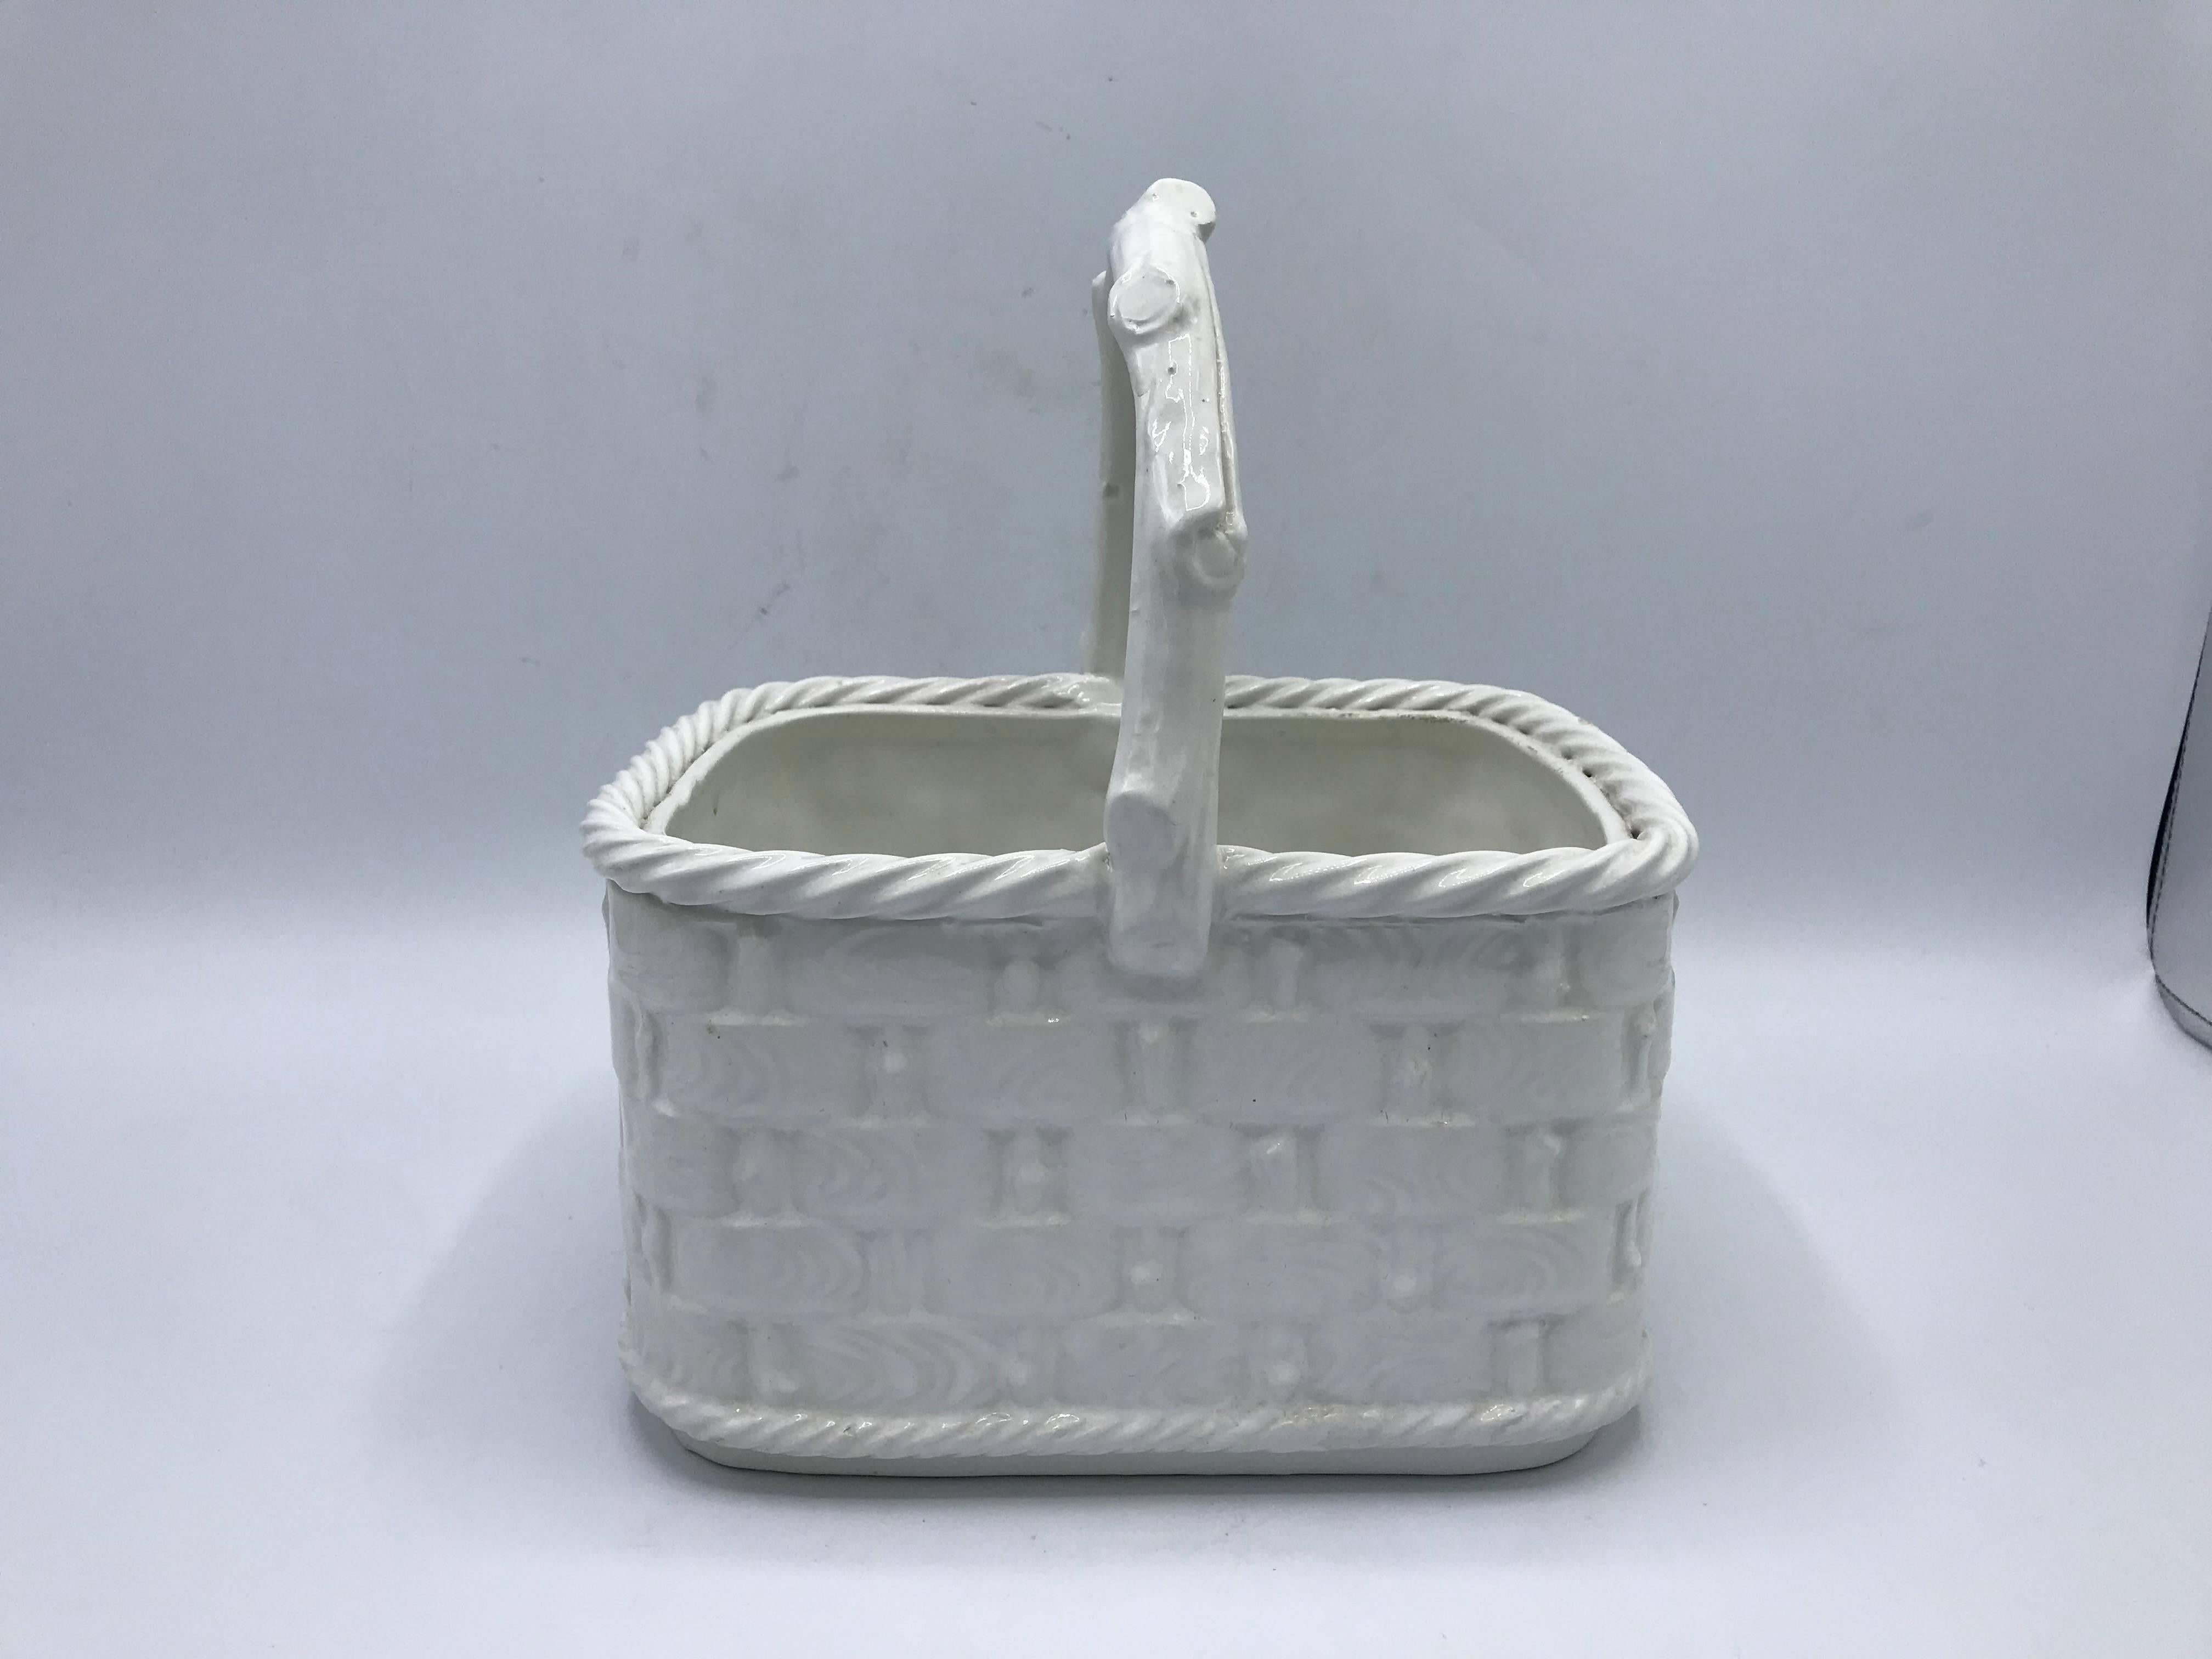 Offered is a stunning, 1960's Italian ceramic faux bois basket planter. The piece has a beautiful basketweave on all sides, with a faux bois motif. Marked 'Italy' on underside. 